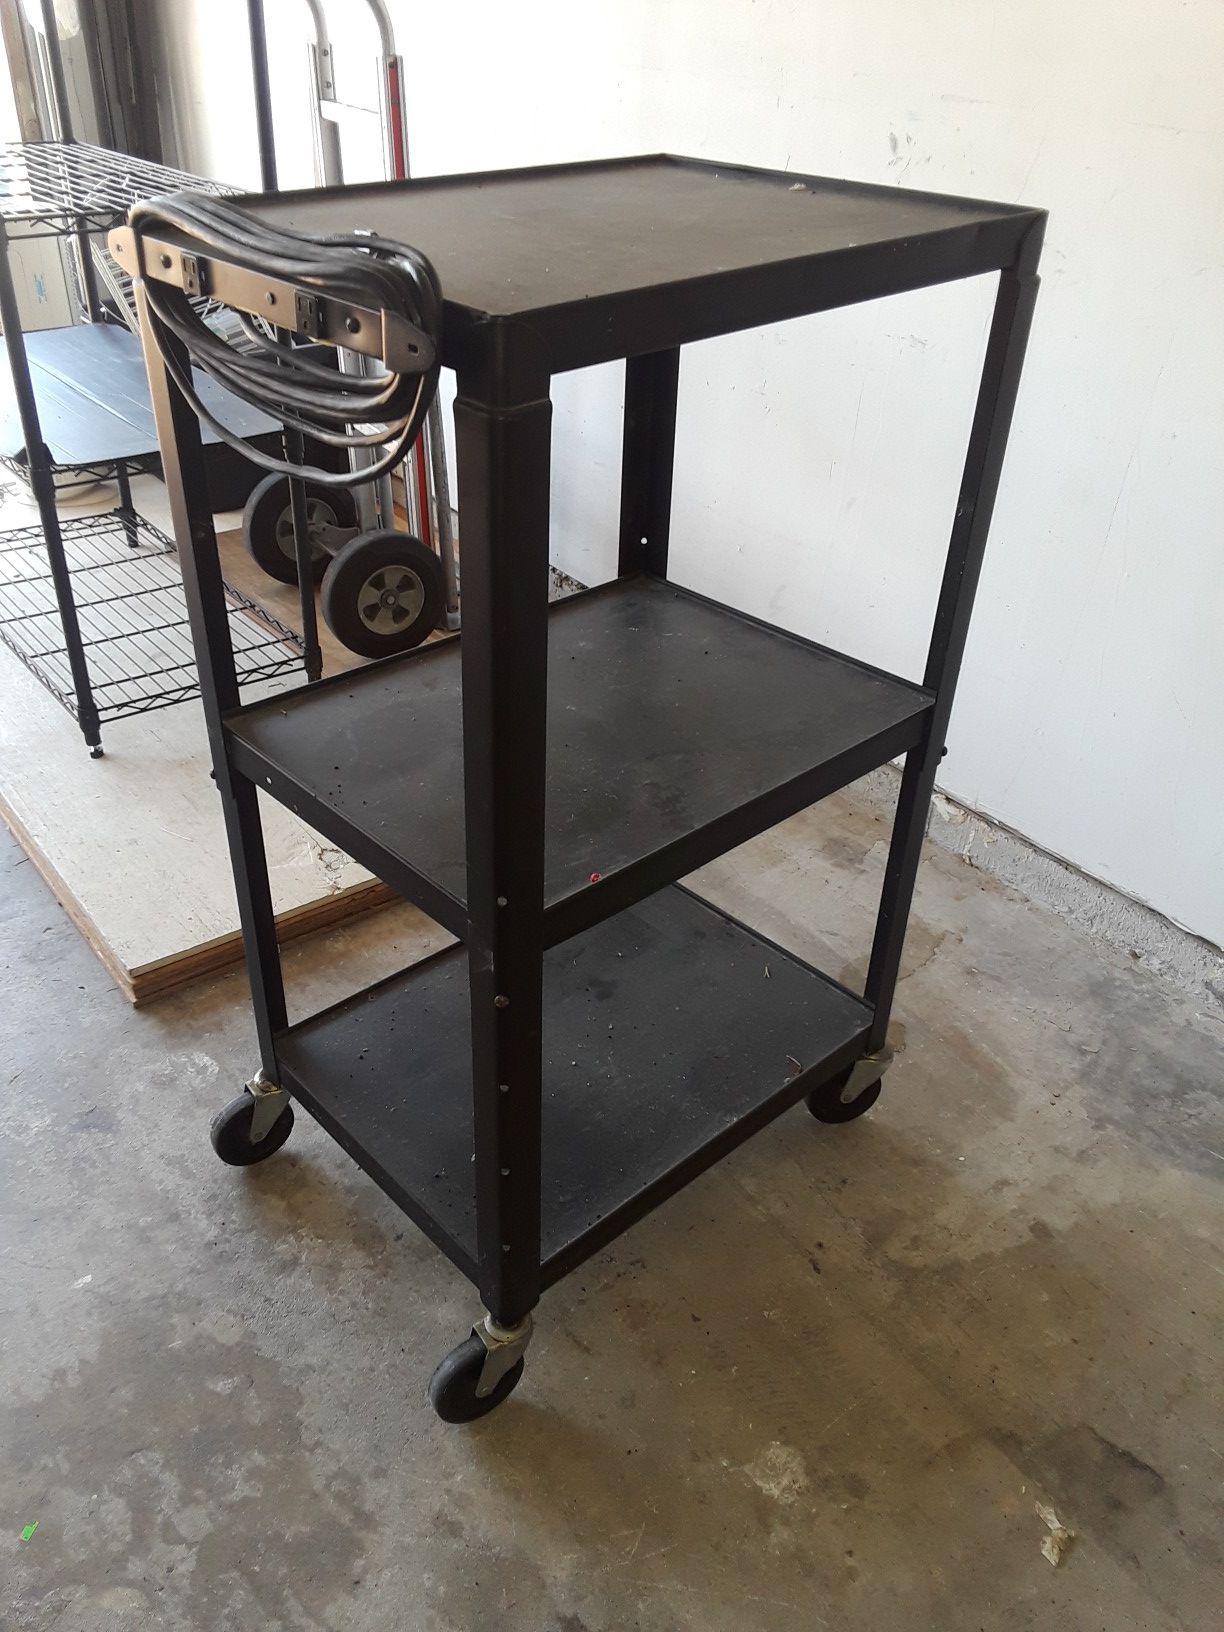 Metal shelve with electric cord